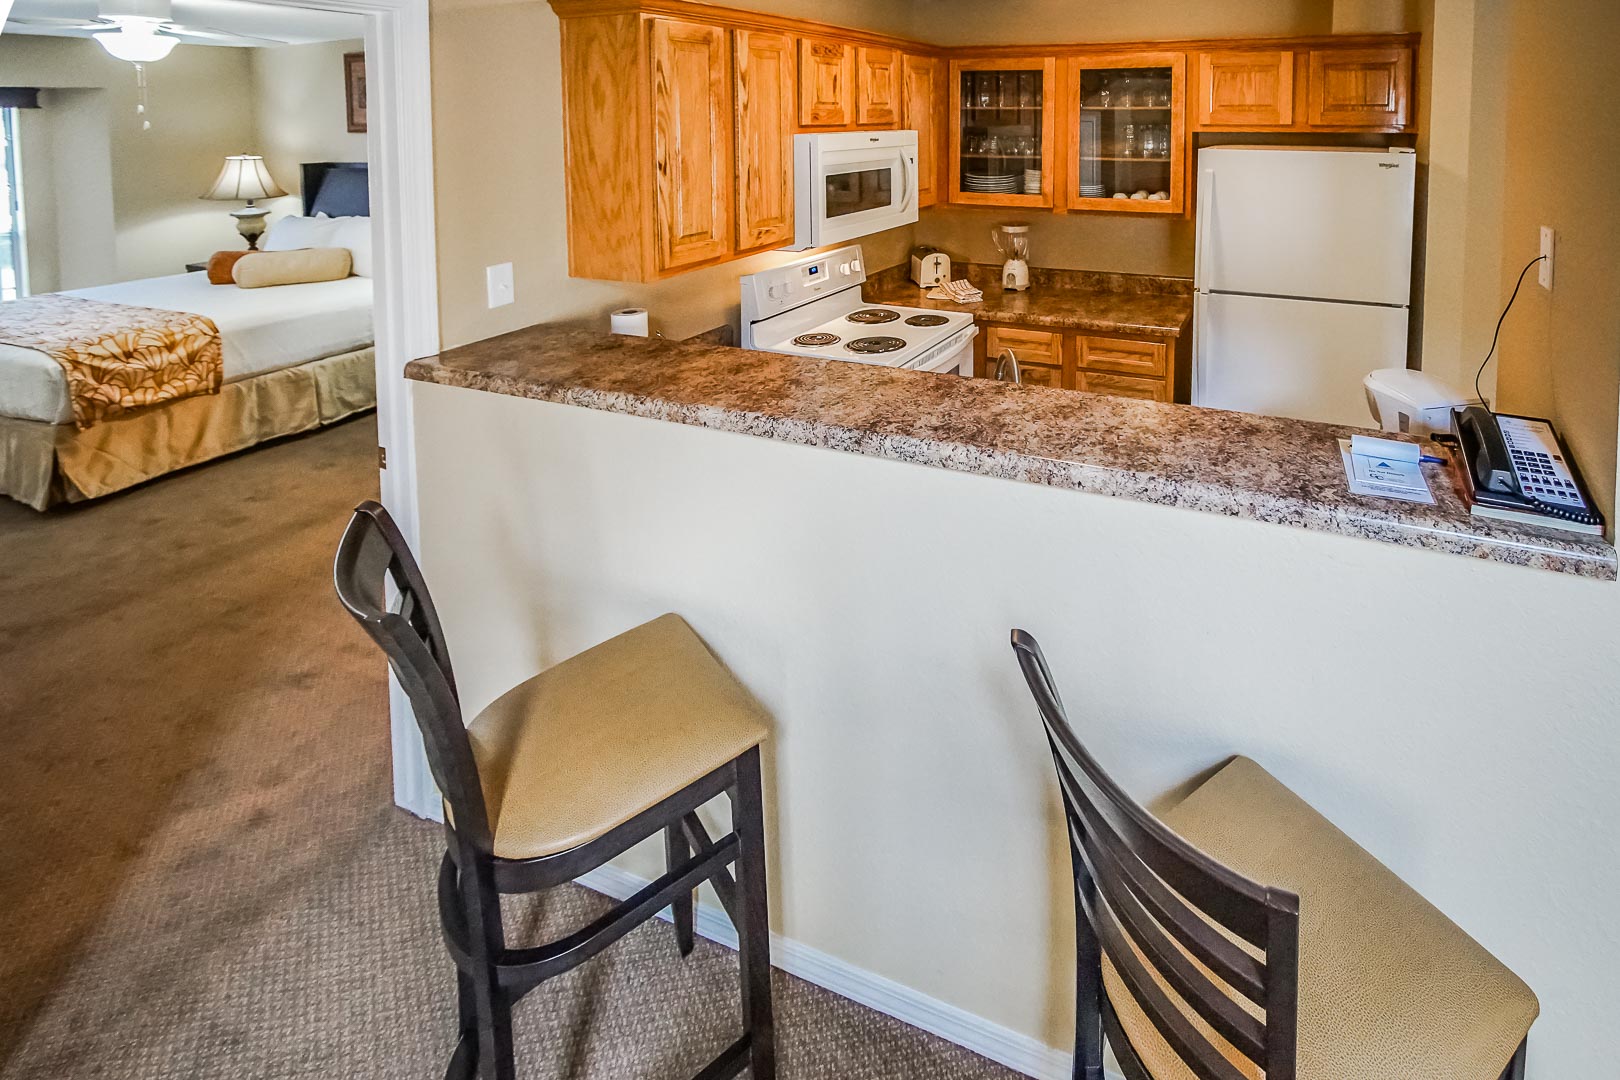 A fully equipped kitchen at The Townhouses Resort in Branson, Missouri.